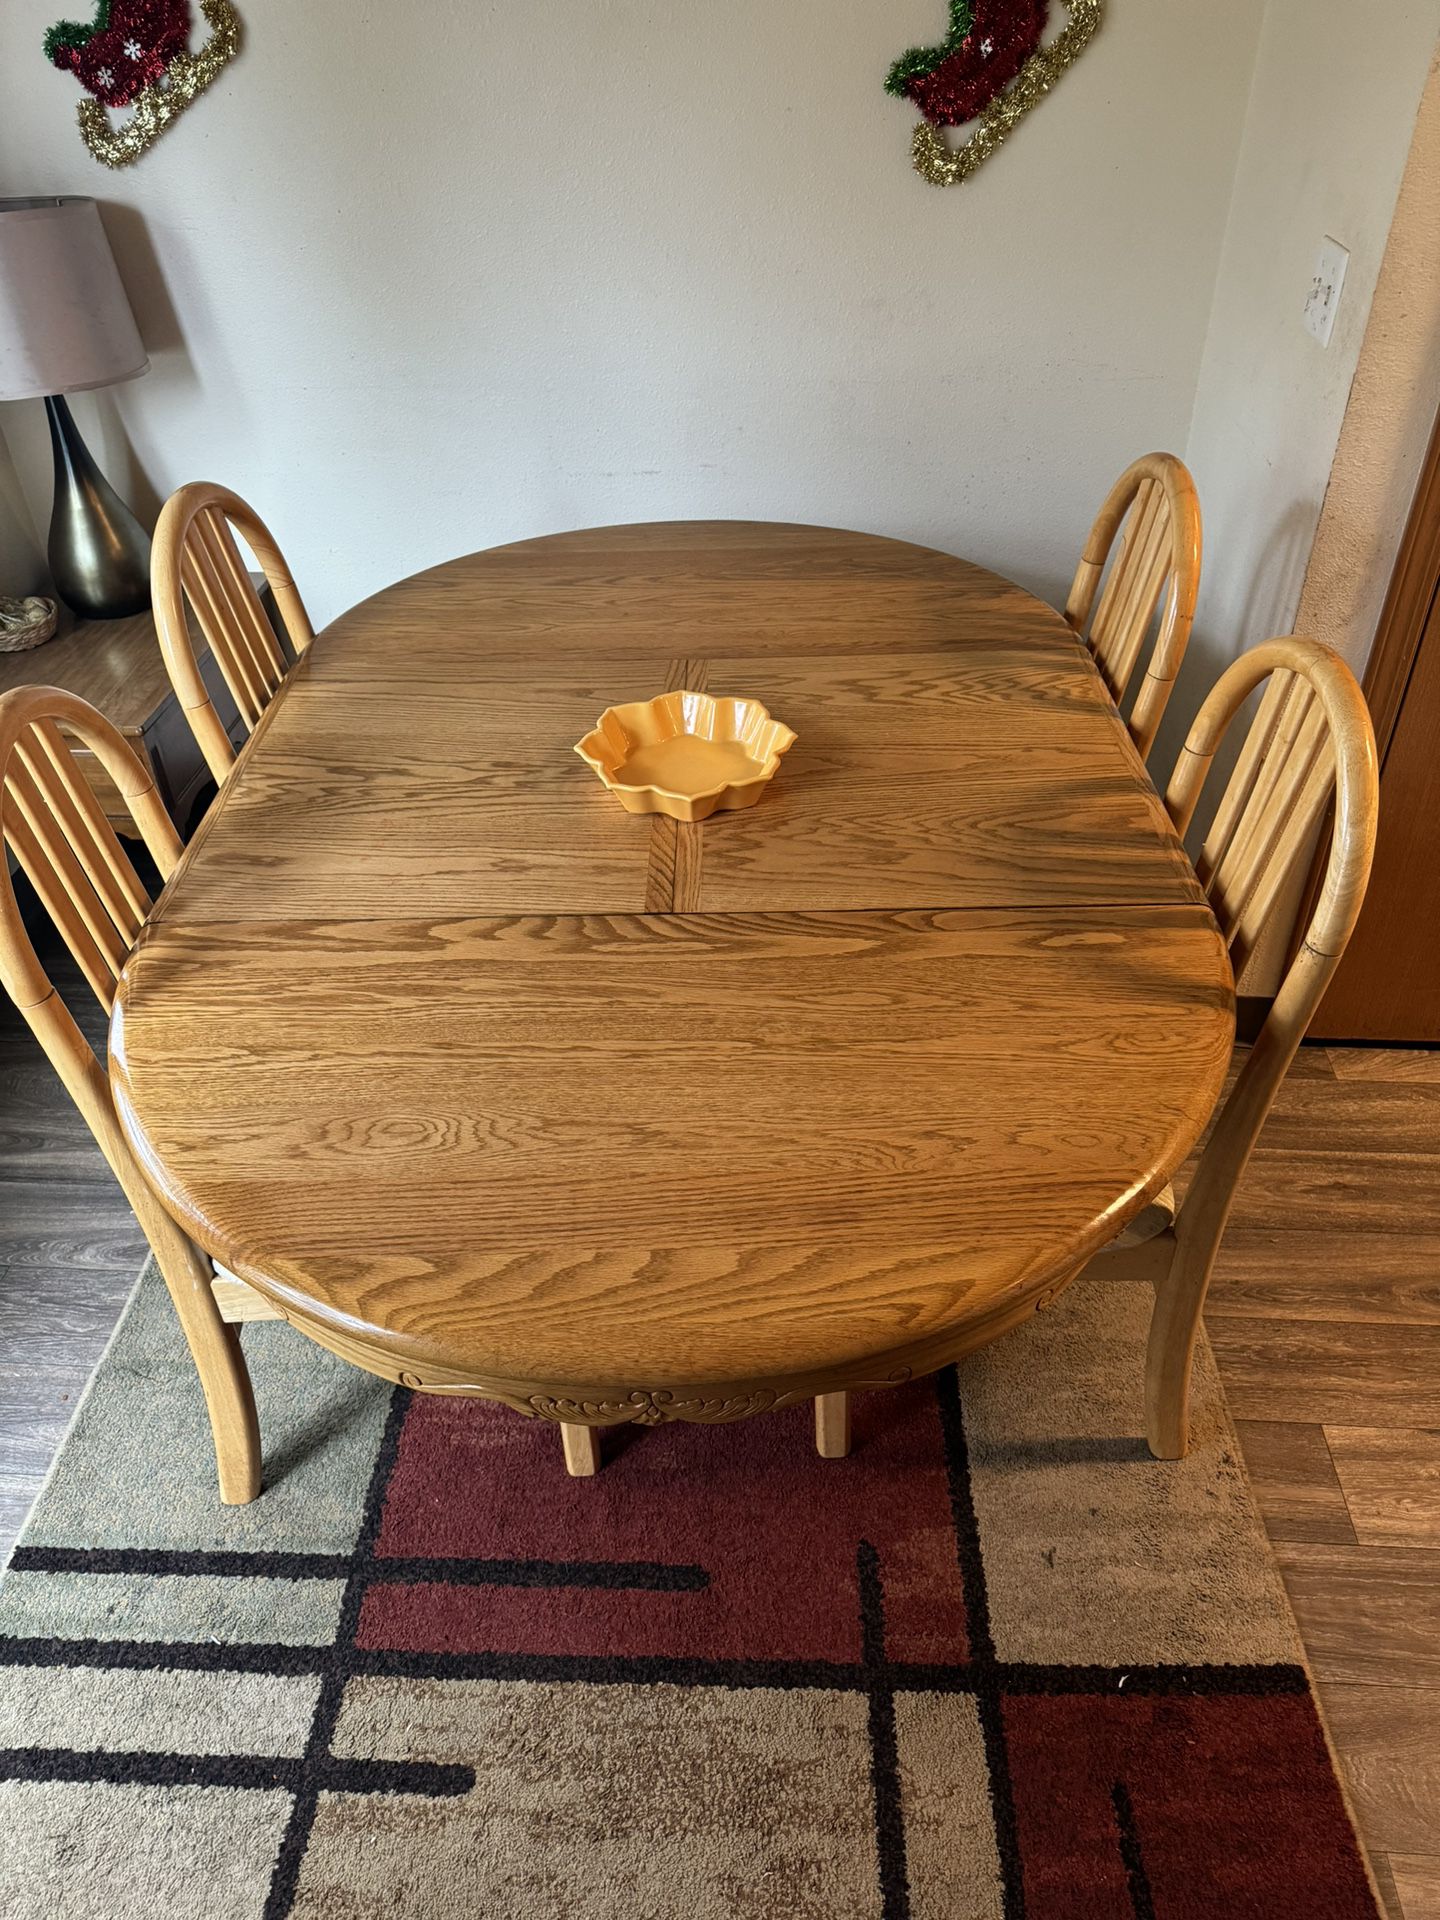 Dinning Table with chairs